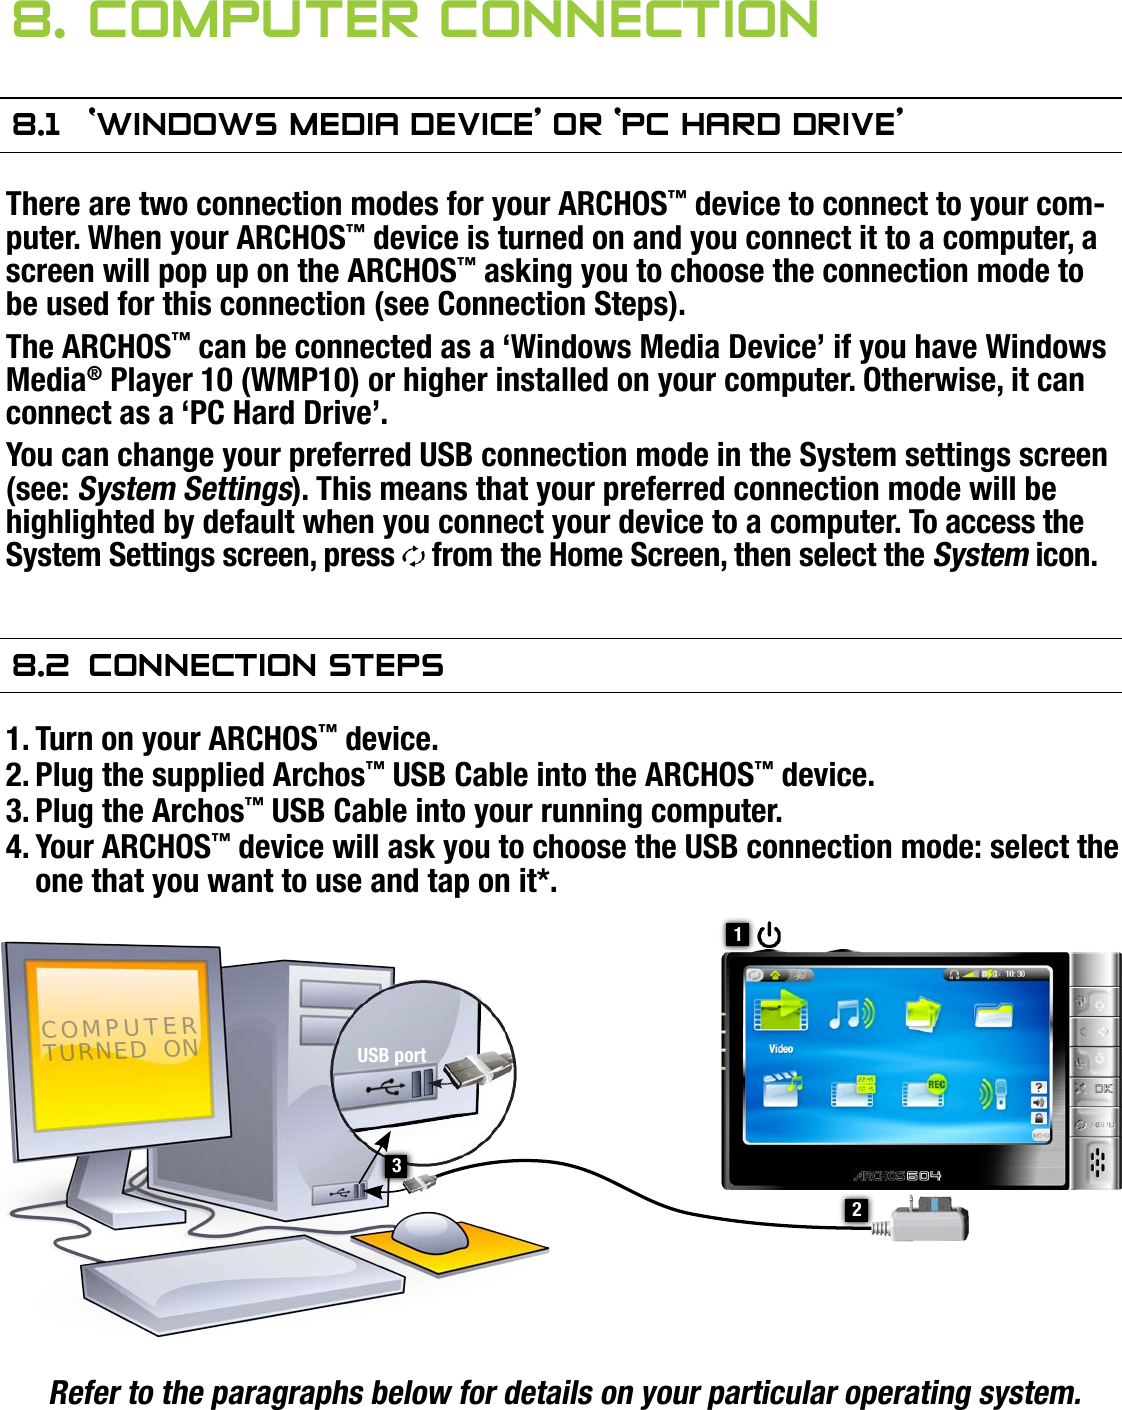 704MANUAL V0.0COMPUTER CONNECTION   &gt;   p. 448. COMPuTer COnneCTiOn8.1  ‘windOws Media deViCe’ Or ‘PC hard driVe’There are two connection modes for your ARCHOS™ device to connect to your com-puter. When your ARCHOS™ device is turned on and you connect it to a computer, a screen will pop up on the ARCHOS™ asking you to choose the connection mode to be used for this connection (see Connection Steps).The ARCHOS™ can be connected as a ‘Windows Media Device’ if you have Windows Media® Player 10 (WMP10) or higher installed on your computer. Otherwise, it can connect as a ‘PC Hard Drive’.You can change your preferred USB connection mode in the System settings screen (see: System Settings). This means that your preferred connection mode will be highlighted by default when you connect your device to a computer. To access the System Settings screen, press   from the Home Screen, then select the System icon.8.2  COnneCTiOn sTePsTurn on your ARCHOS™ device.Plug the supplied Archos™ USB Cable into the ARCHOS™ device.Plug the Archos™ USB Cable into your running computer.Your ARCHOS™ device will ask you to choose the USB connection mode: select the one that you want to use and tap on it*.Refer to the paragraphs below for details on your particular operating system.* If you select ‘Charge only’, your device will just charge its batteries via the USB cable. You can use it as normal. At any time, you will be able to enable the USB con-nection by selecting the Enable USB menu item in the Home Screen.1.2.3.4.21COMPUTER TURNED  ONUSB port3